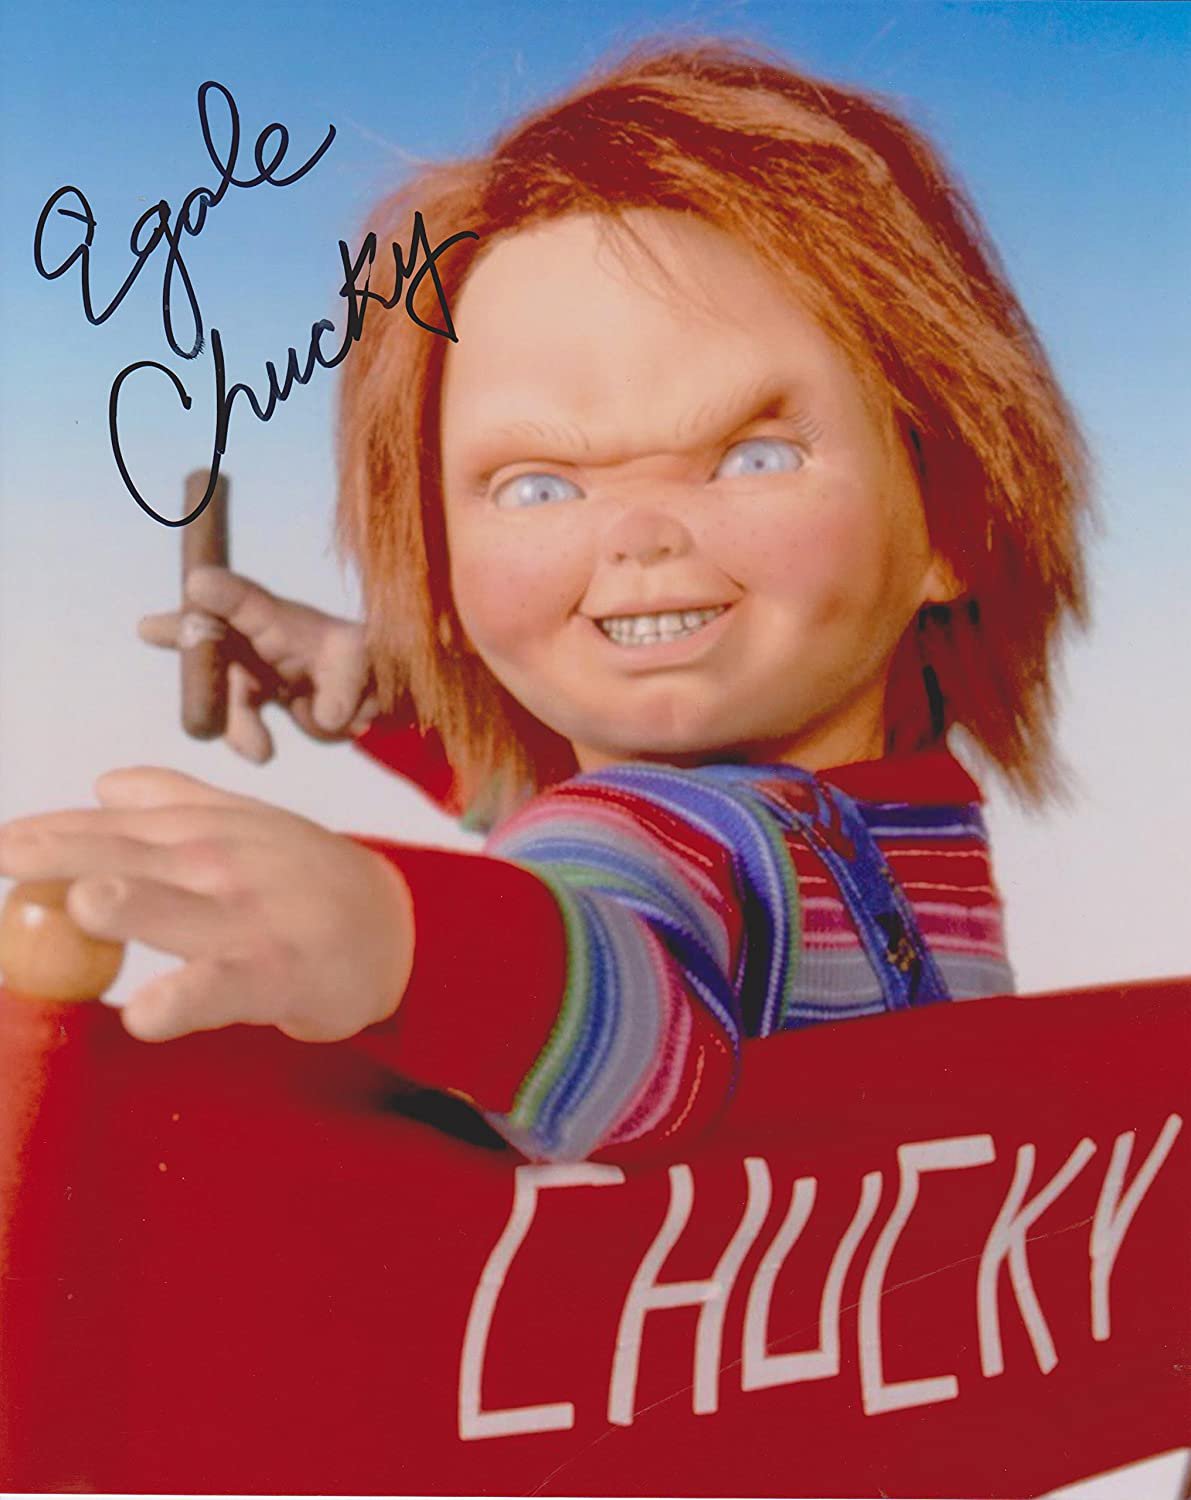 Ed Gale as Chucky Signed & Mounted 8 X 10" Autographed Photo (Reprint 2300) Great Gift Idea!